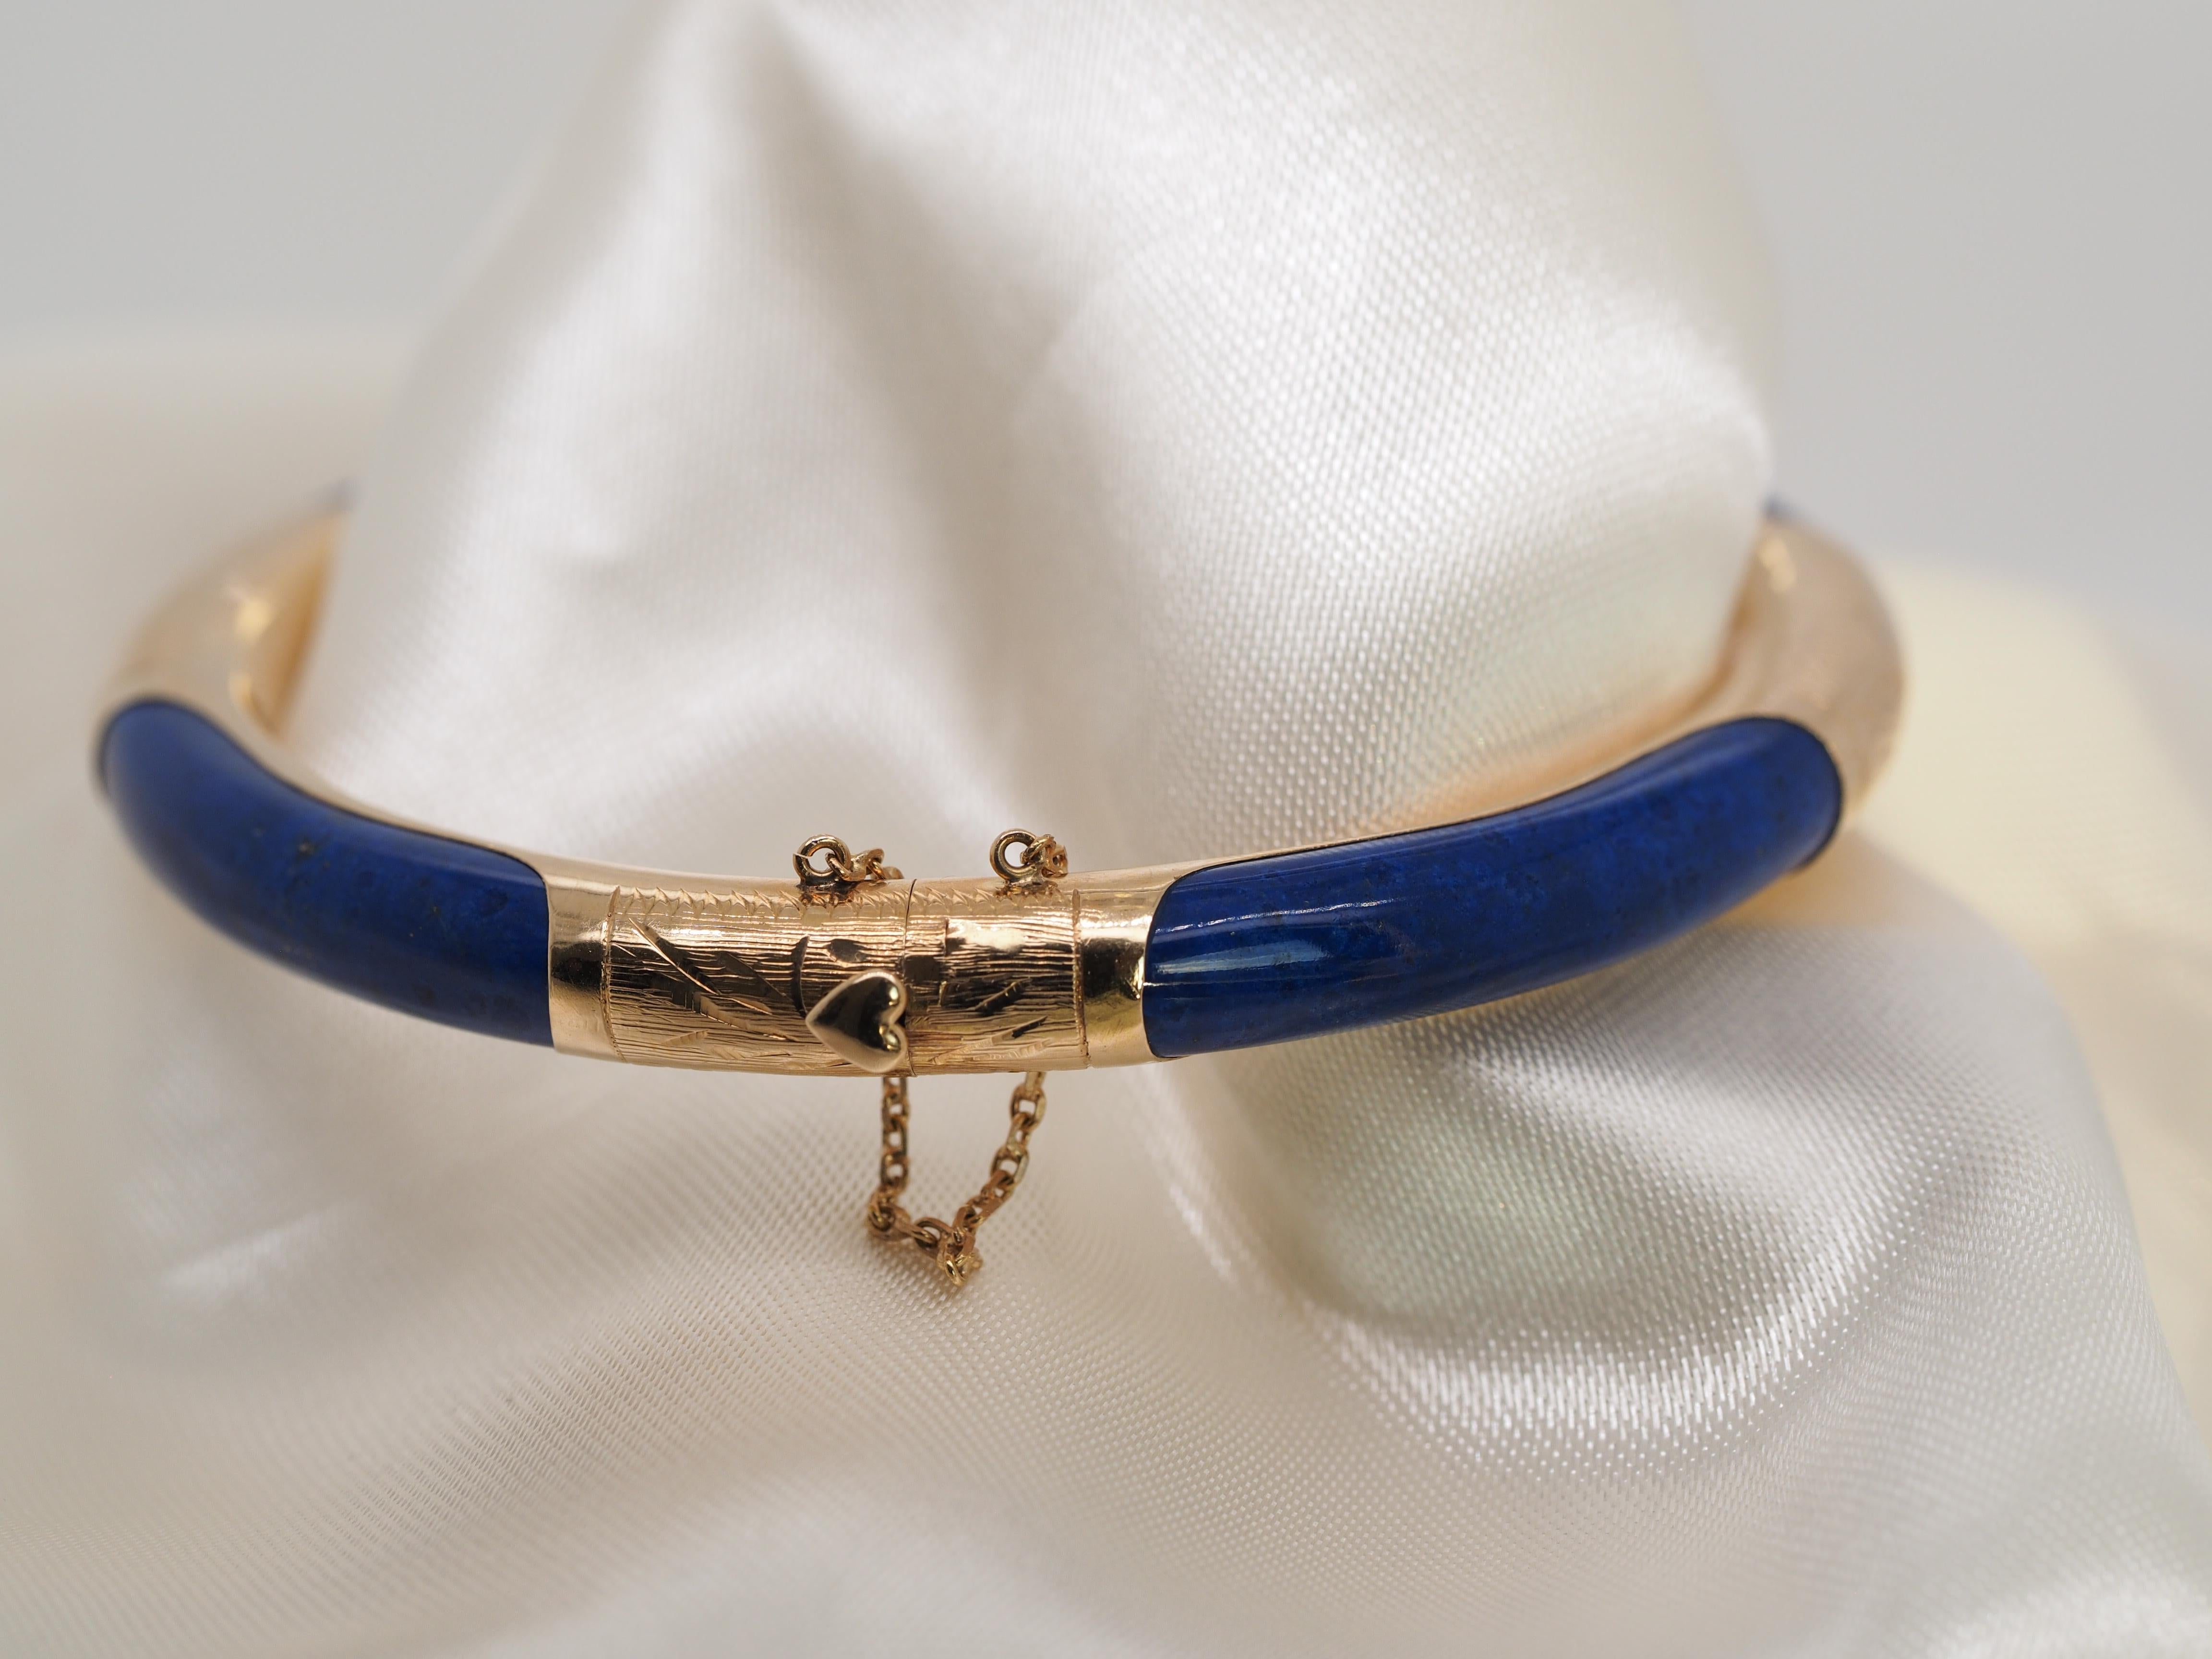 Vintage 14 karat Yellow Gold hinged Lapis Bangle bracelet with a dangle chain on the clasp. The clasp has a detail of heart that pushes down to open the bracelet. It is in excellent condition  perfect for any occasion. 

Item Details:
Metal Type: